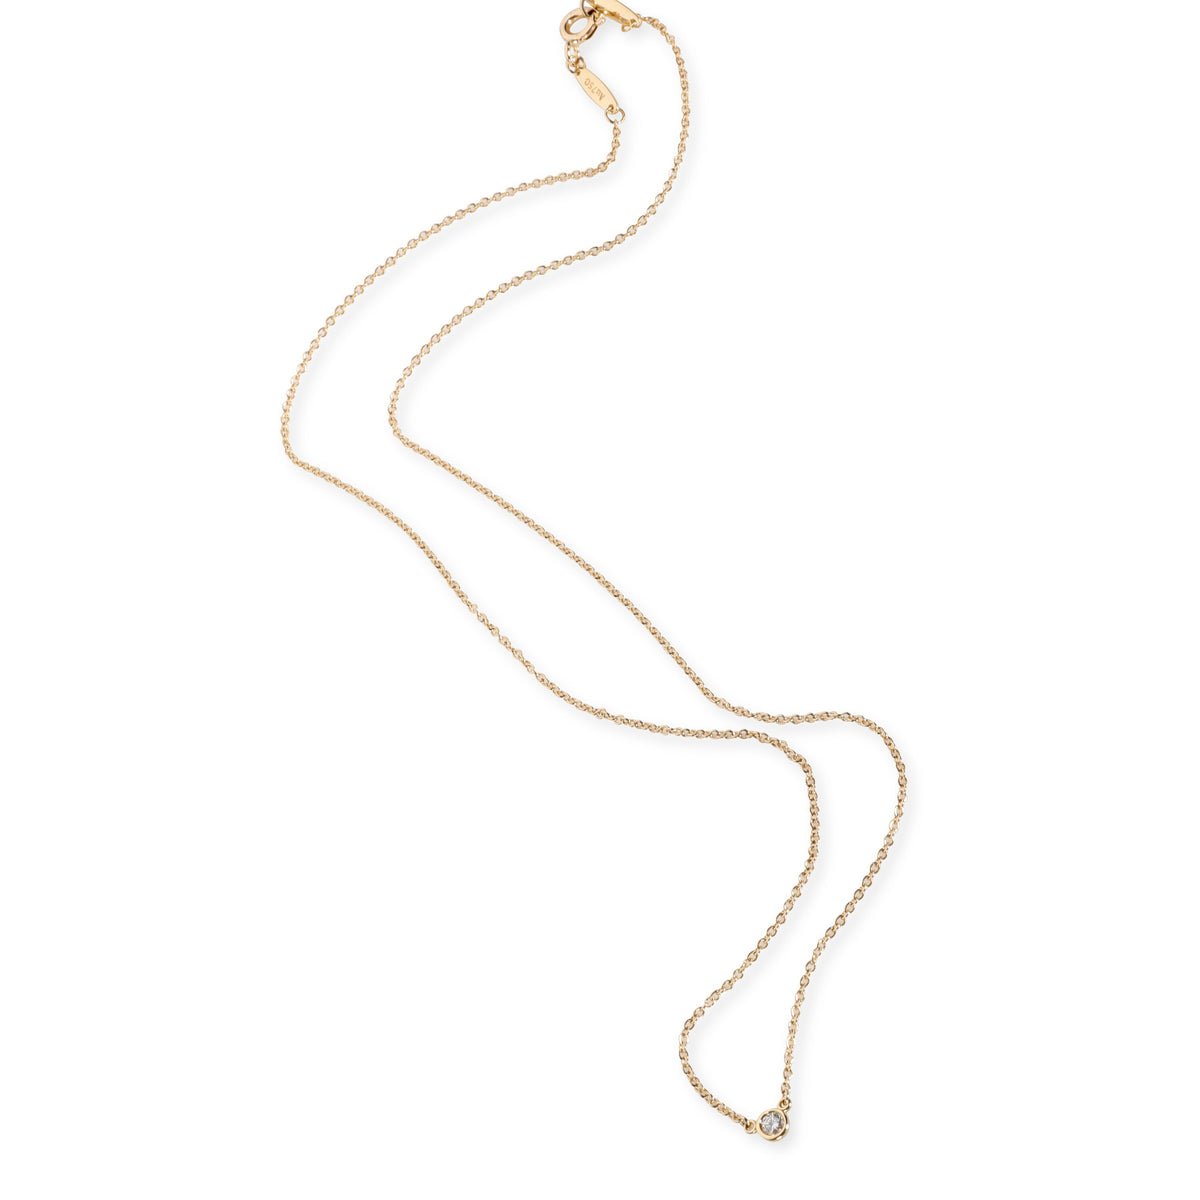 Tiffany & Co. Elsa Peretti Diamonds by the Yard Necklace in 18K Gold 0.05 CTW